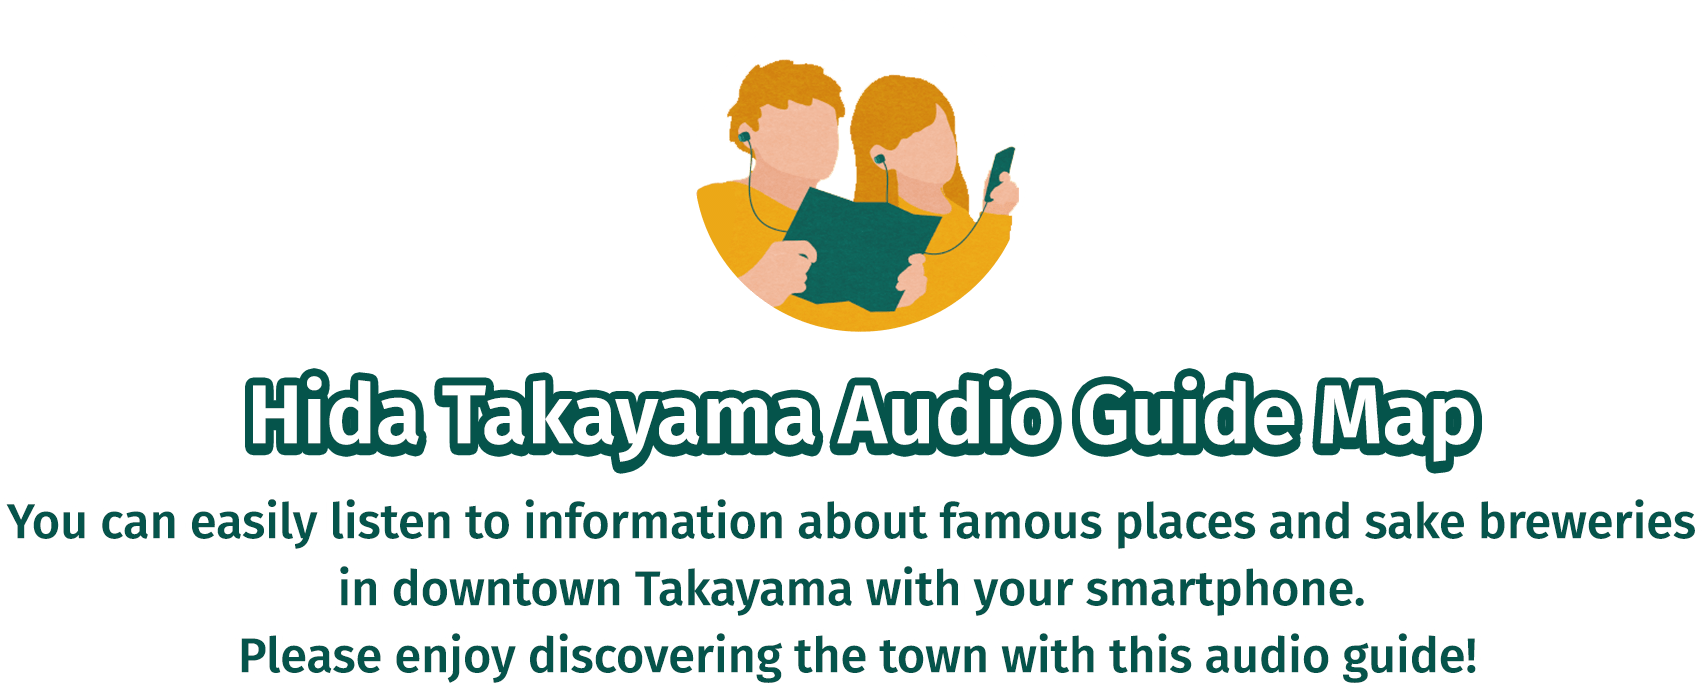 Hida Takayama Audio Guide Map You can easily listen to information about famous places and sake breweries in downtown Takayama with your smartphone. Please enjoy discovering the town with this audio guide!